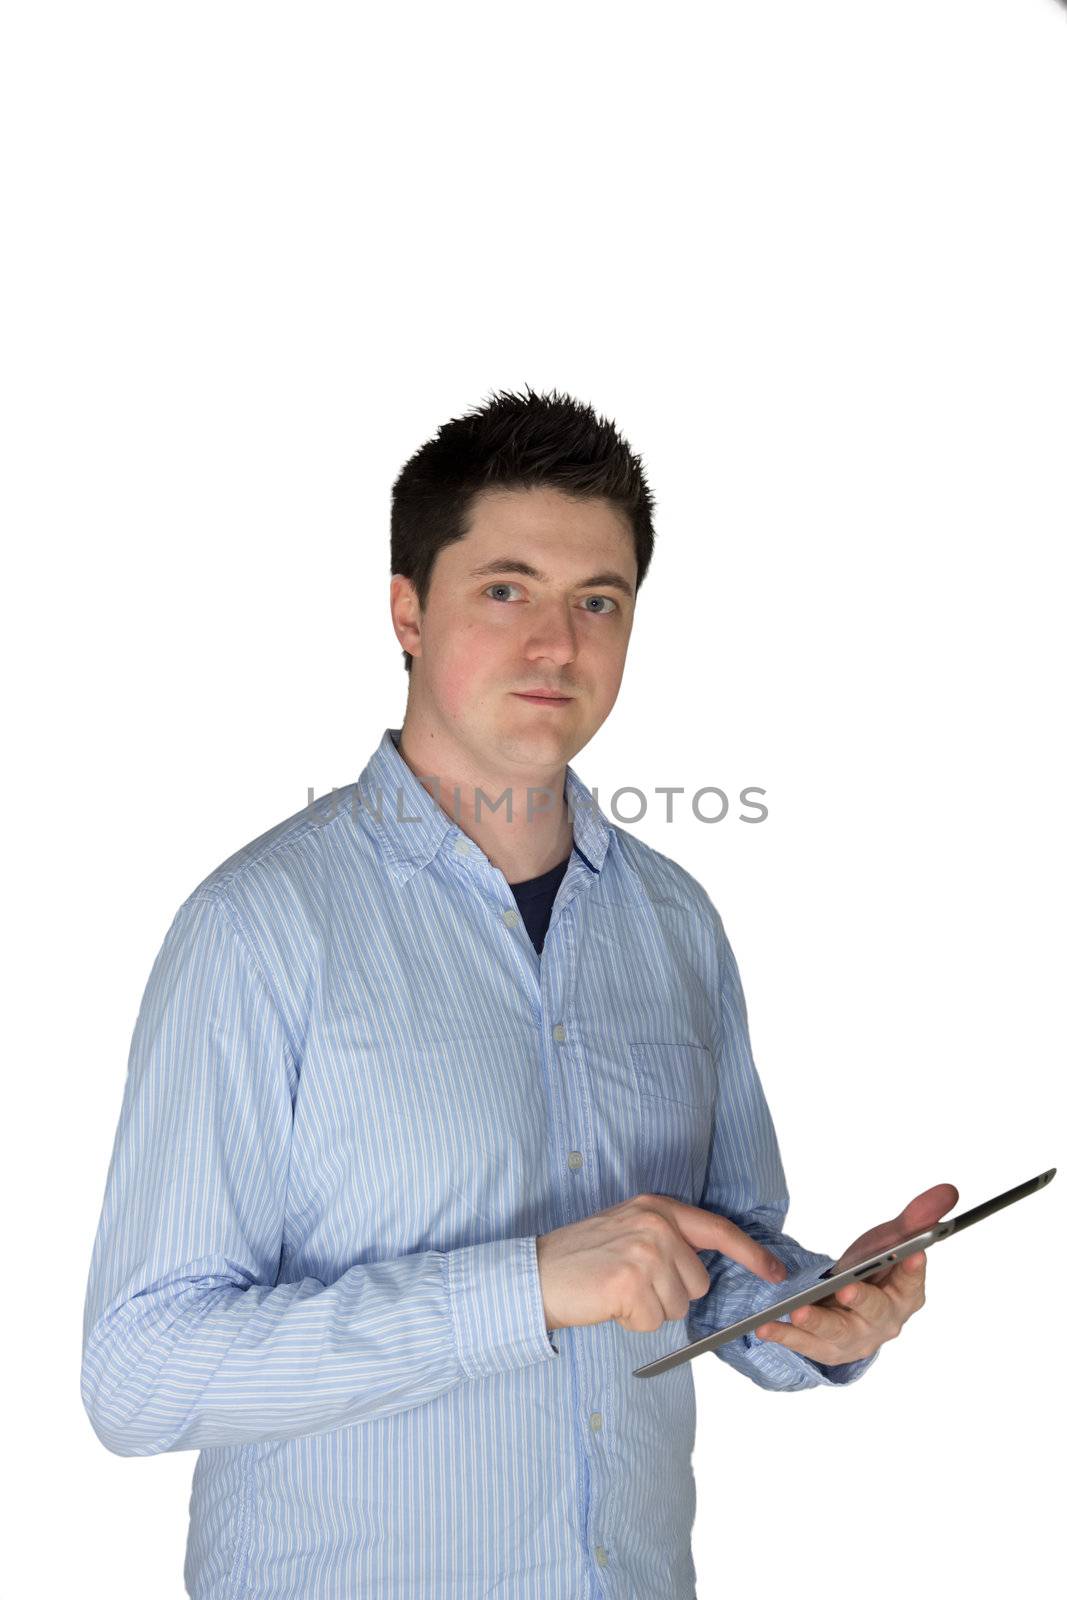 A picture of a man touching a tablet and looking in the cameras direction